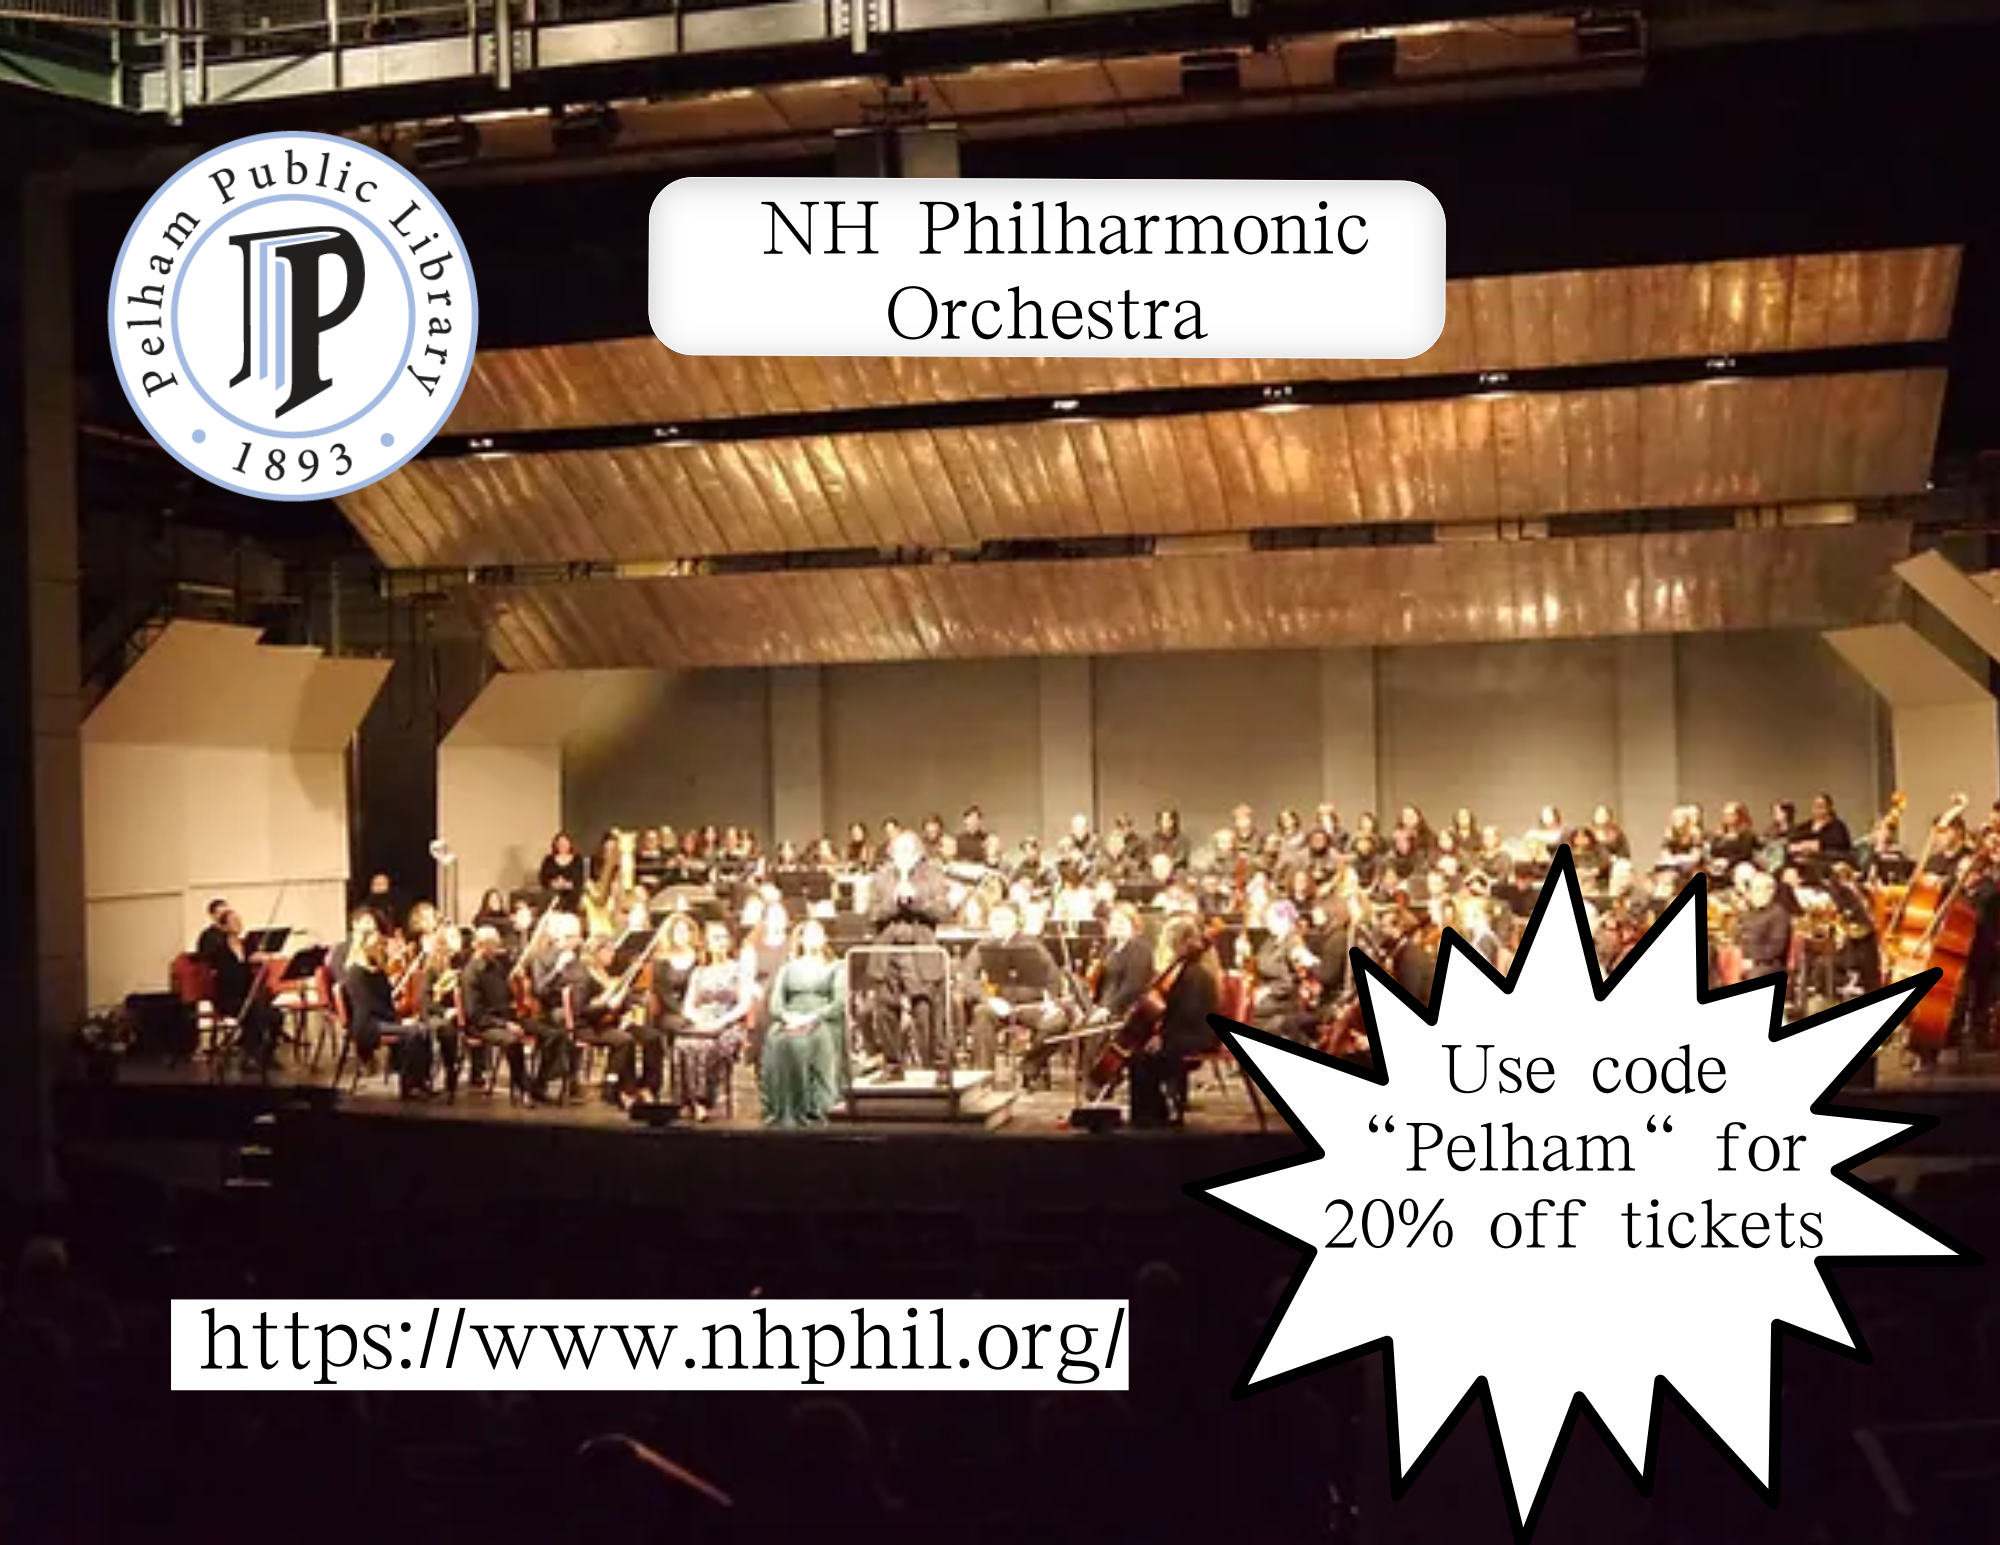 20% off tickets to the NH Philharmonic Orchestra